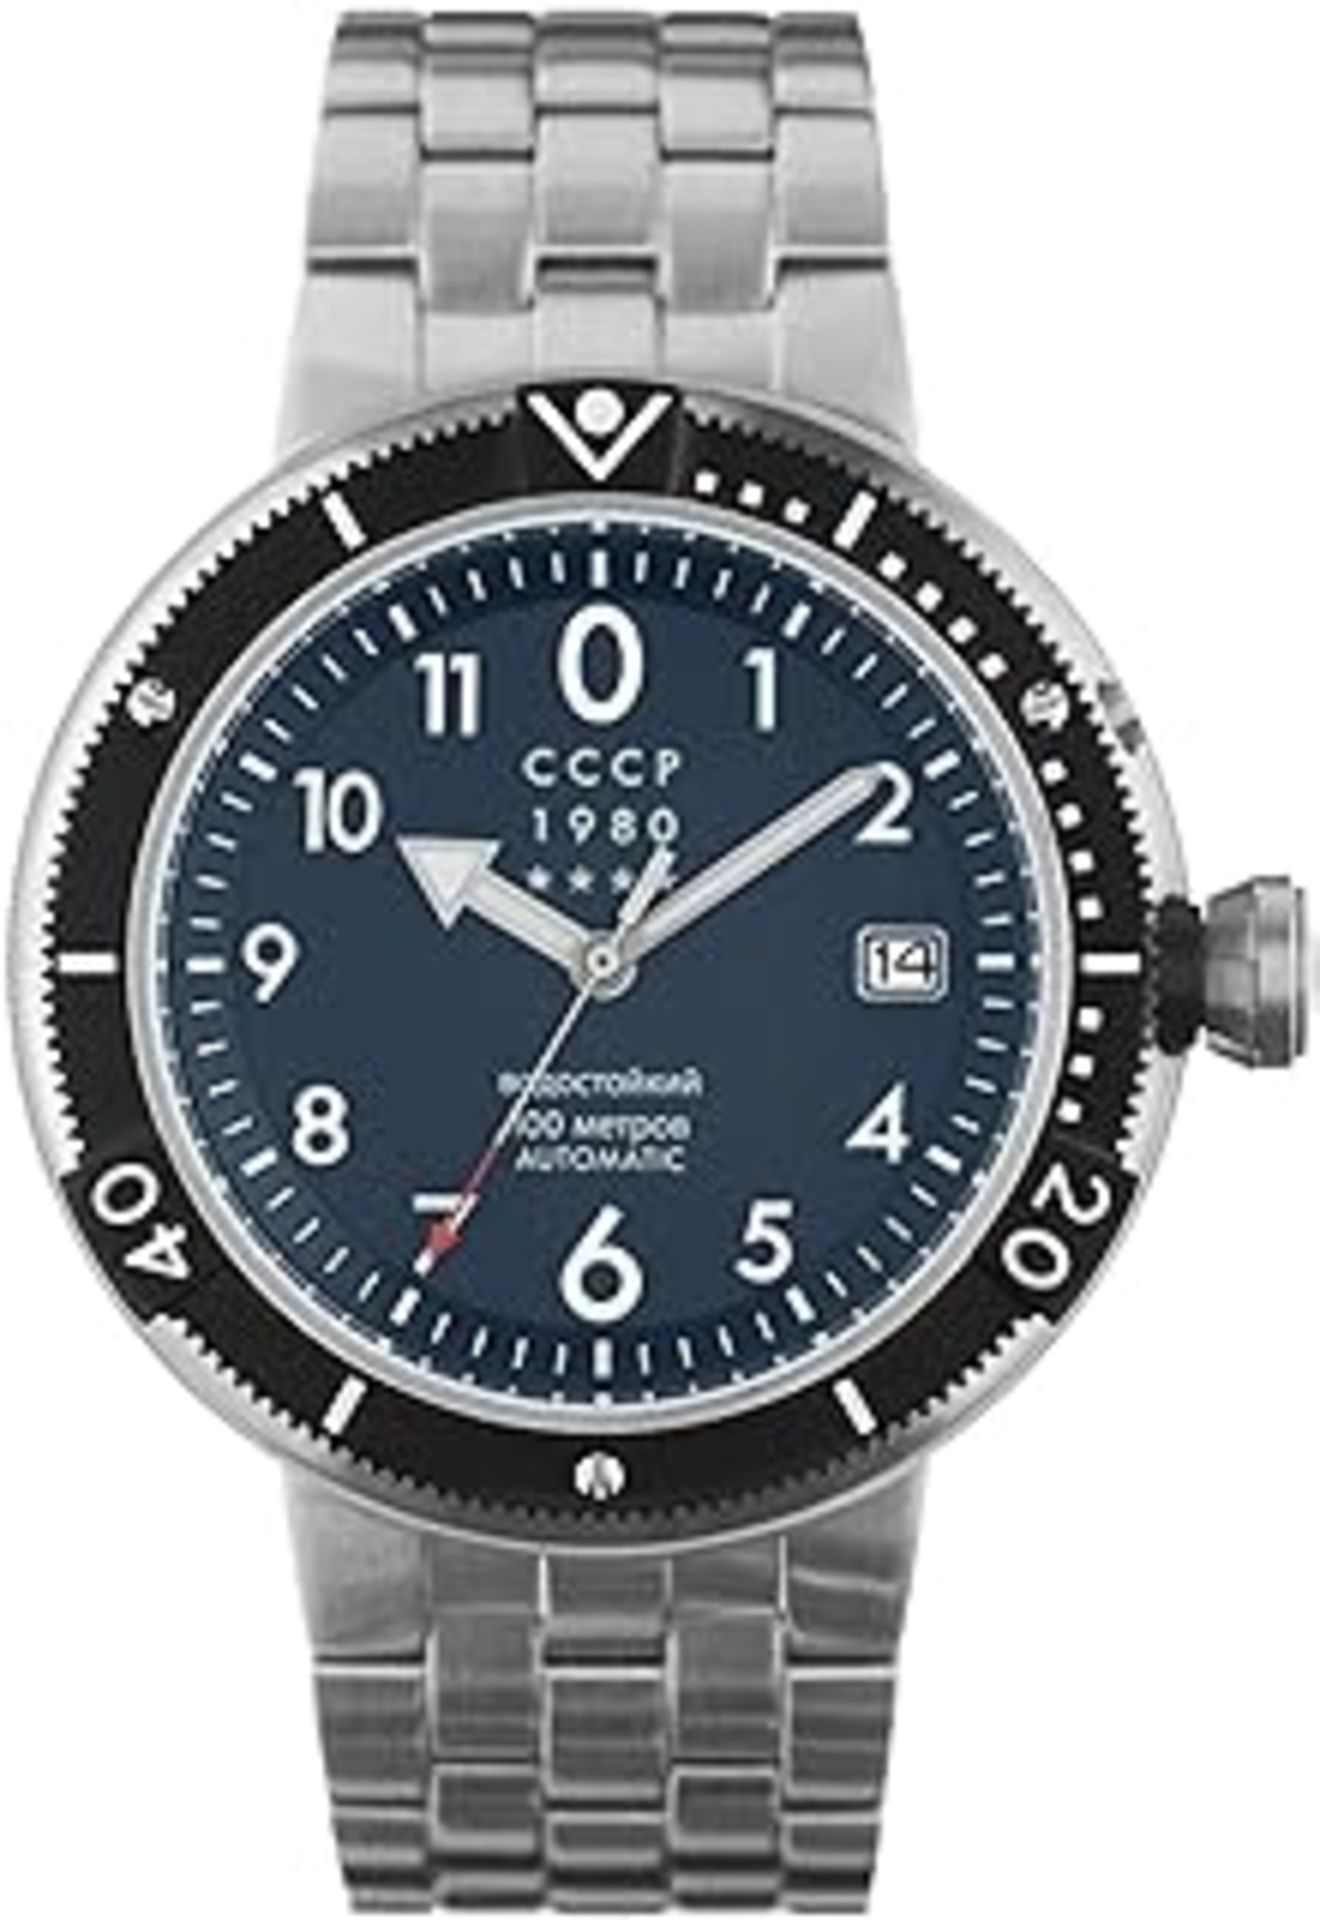 CCCP KASHALOT SUBMARINE Automatic Watch - CP-7004-55 - Image 2 of 4